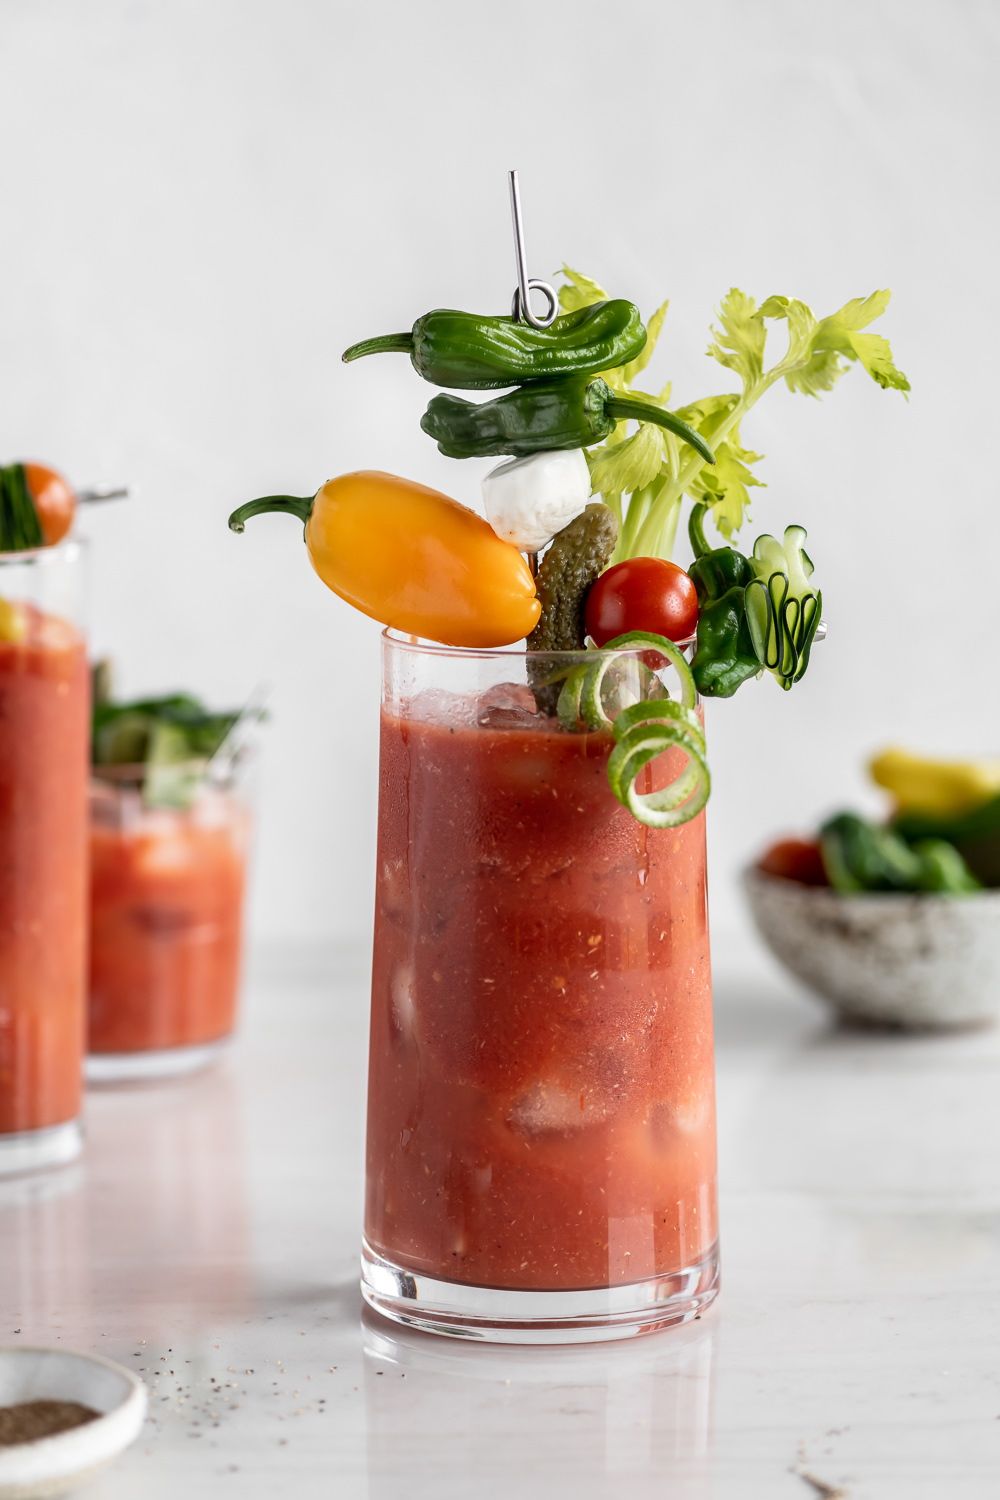 https://www.withspice.com/wp-content/uploads/2021/01/hot-and-spicy-homemade-bloody-mary-mix.jpg